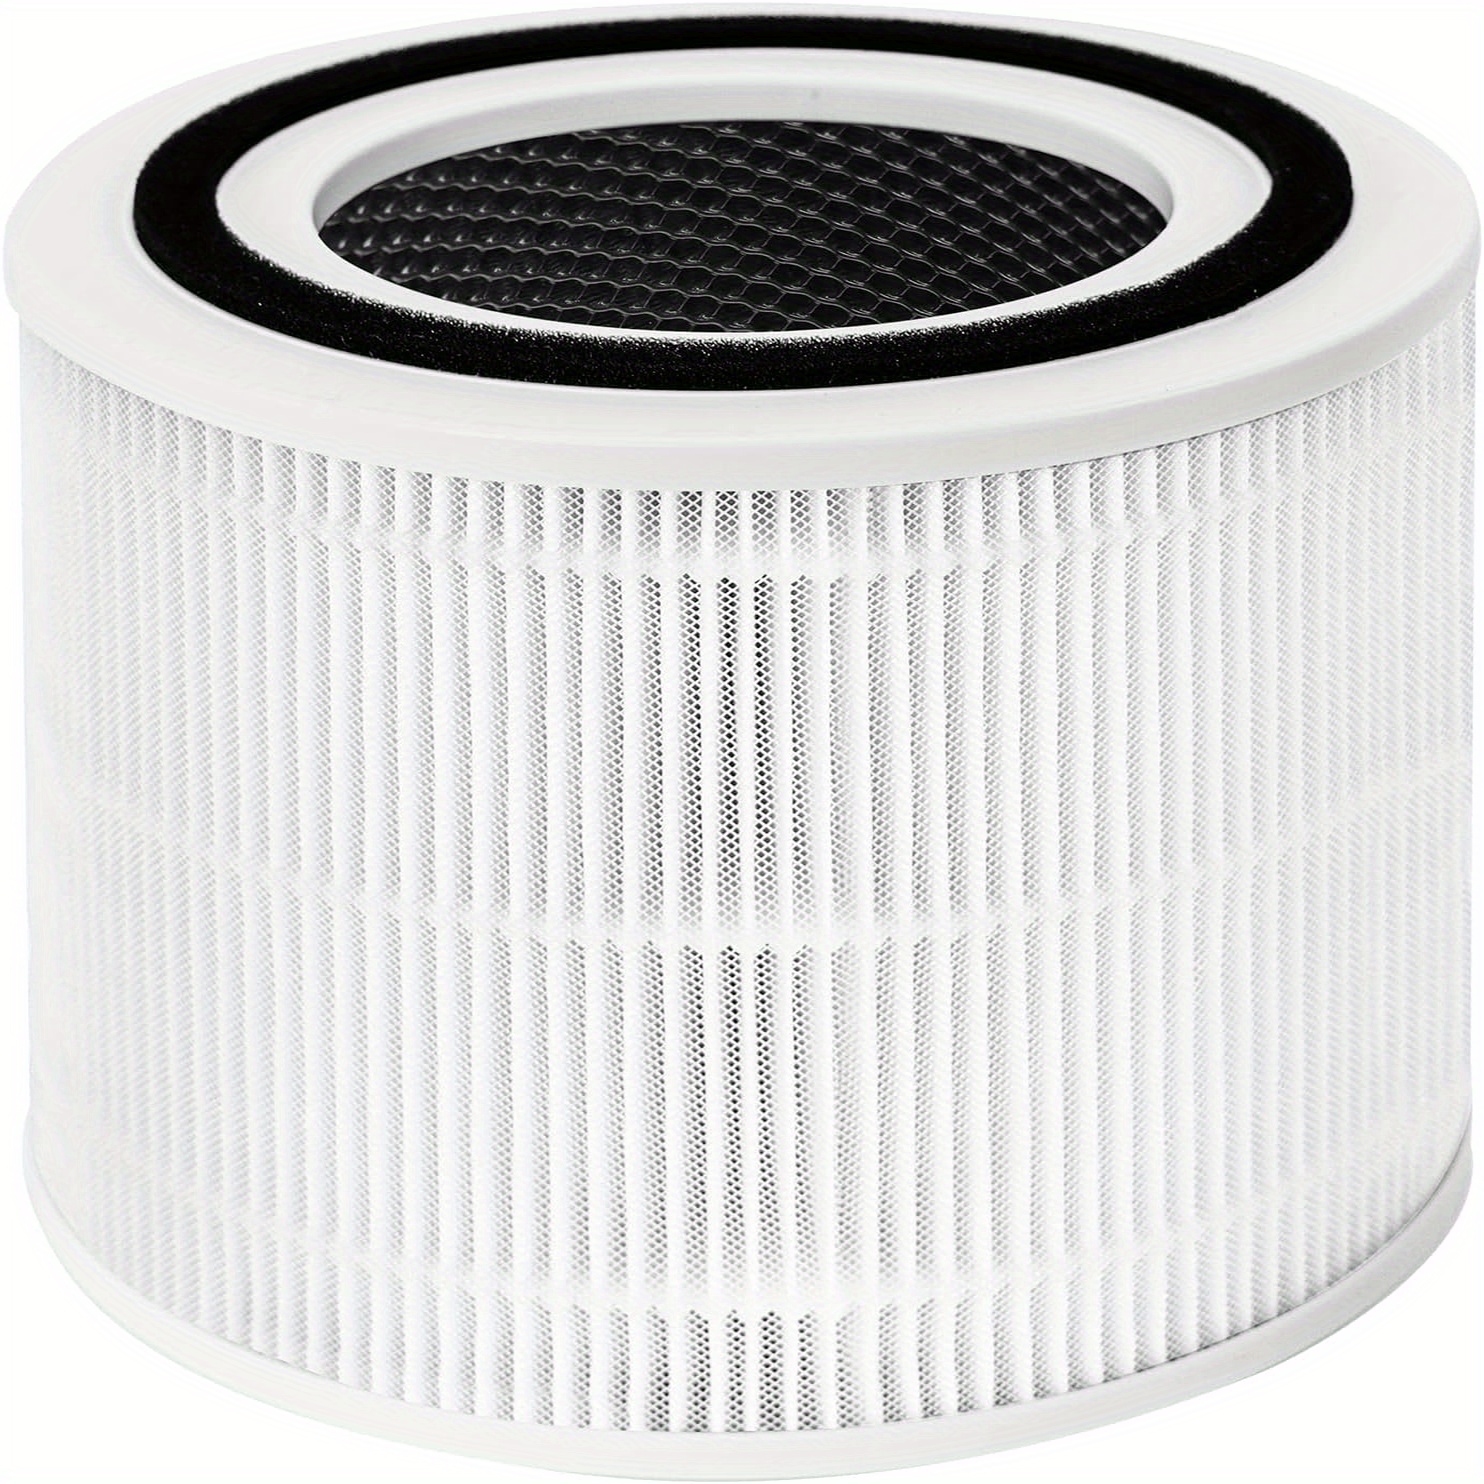 Levoit Air Purifier Replacement Filter LV-H128-RF, Genuine, for